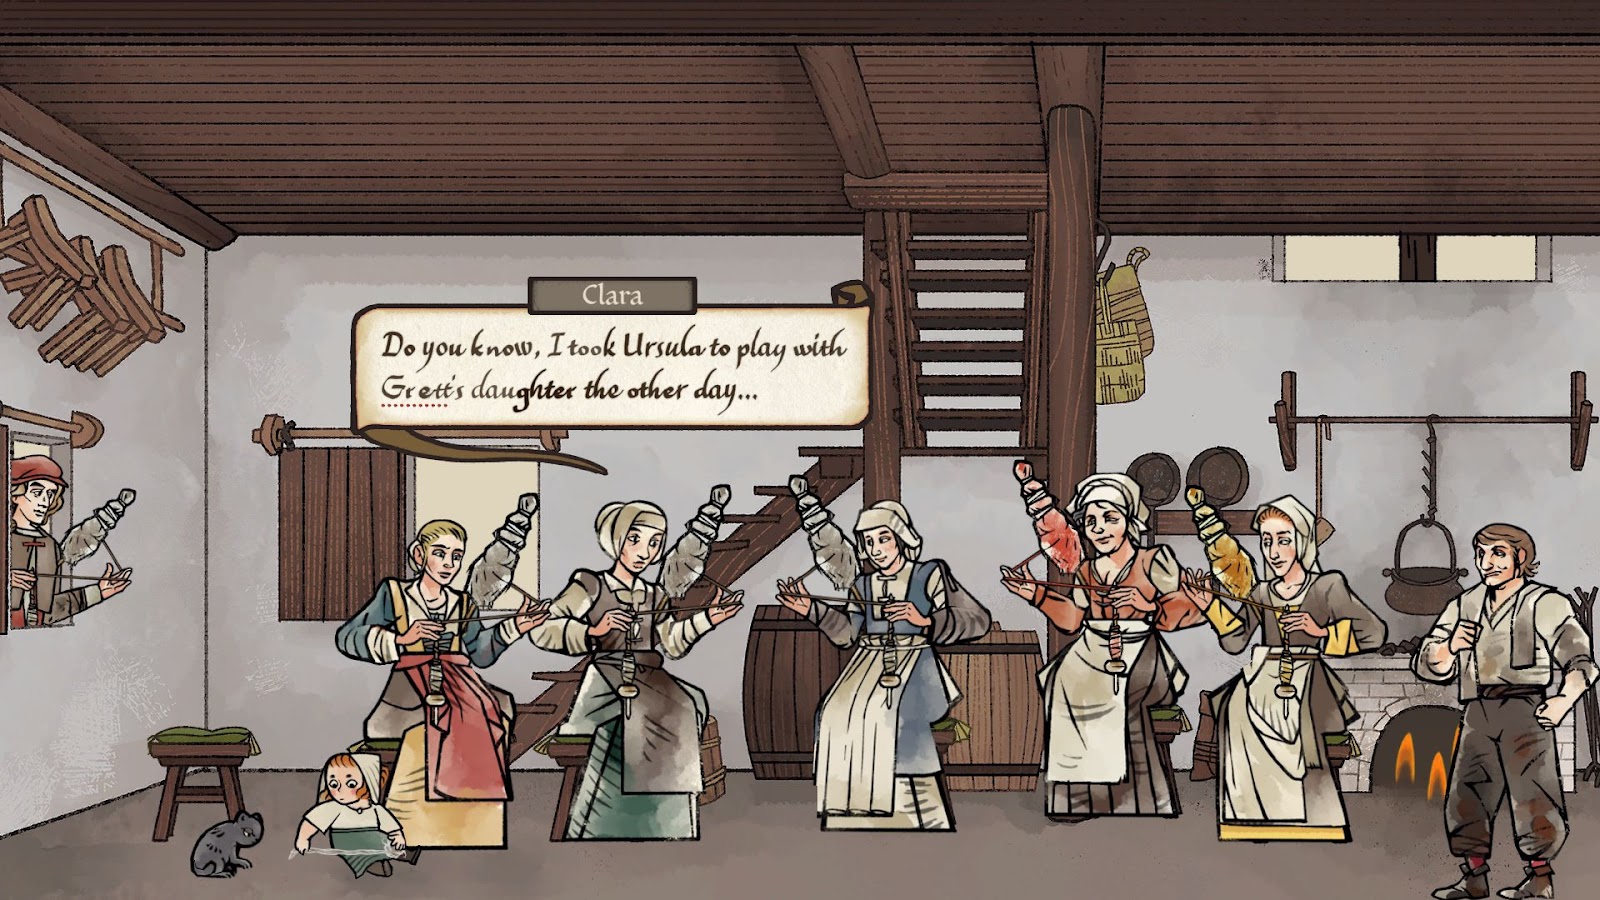 A screenshot of gameplay showing Andreas visiting with five women and a young girl spinning wool in an early modern home, while a village man looks on. The style of the image mimics a woodcut.